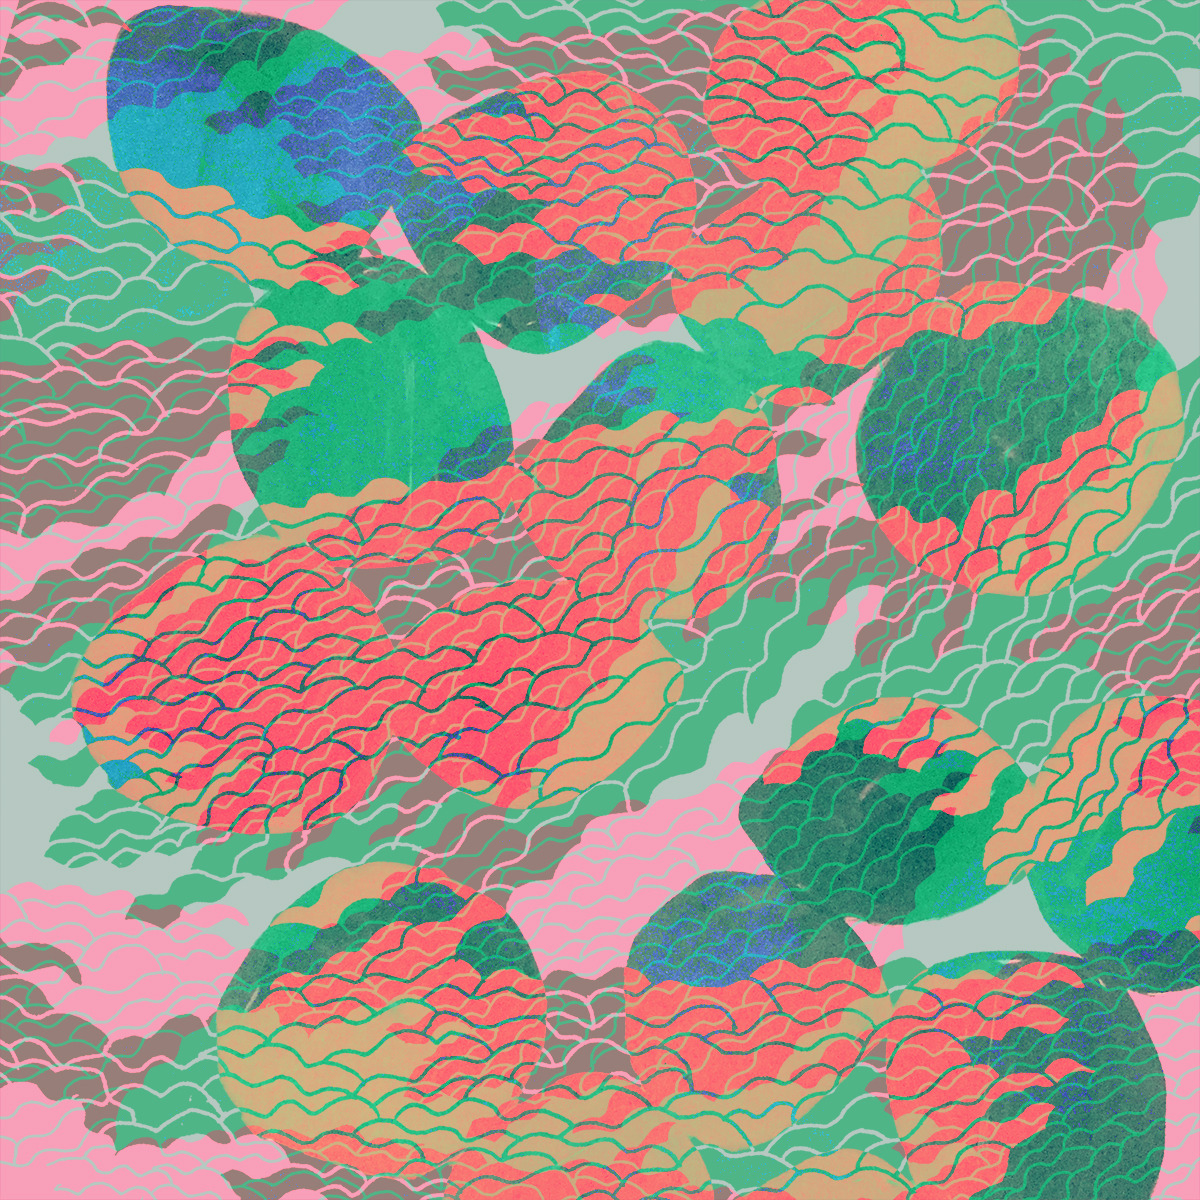 Part of an ongoing pattern illustration project by Hawnuh Lee patternperdiem.com @hawnuhlee